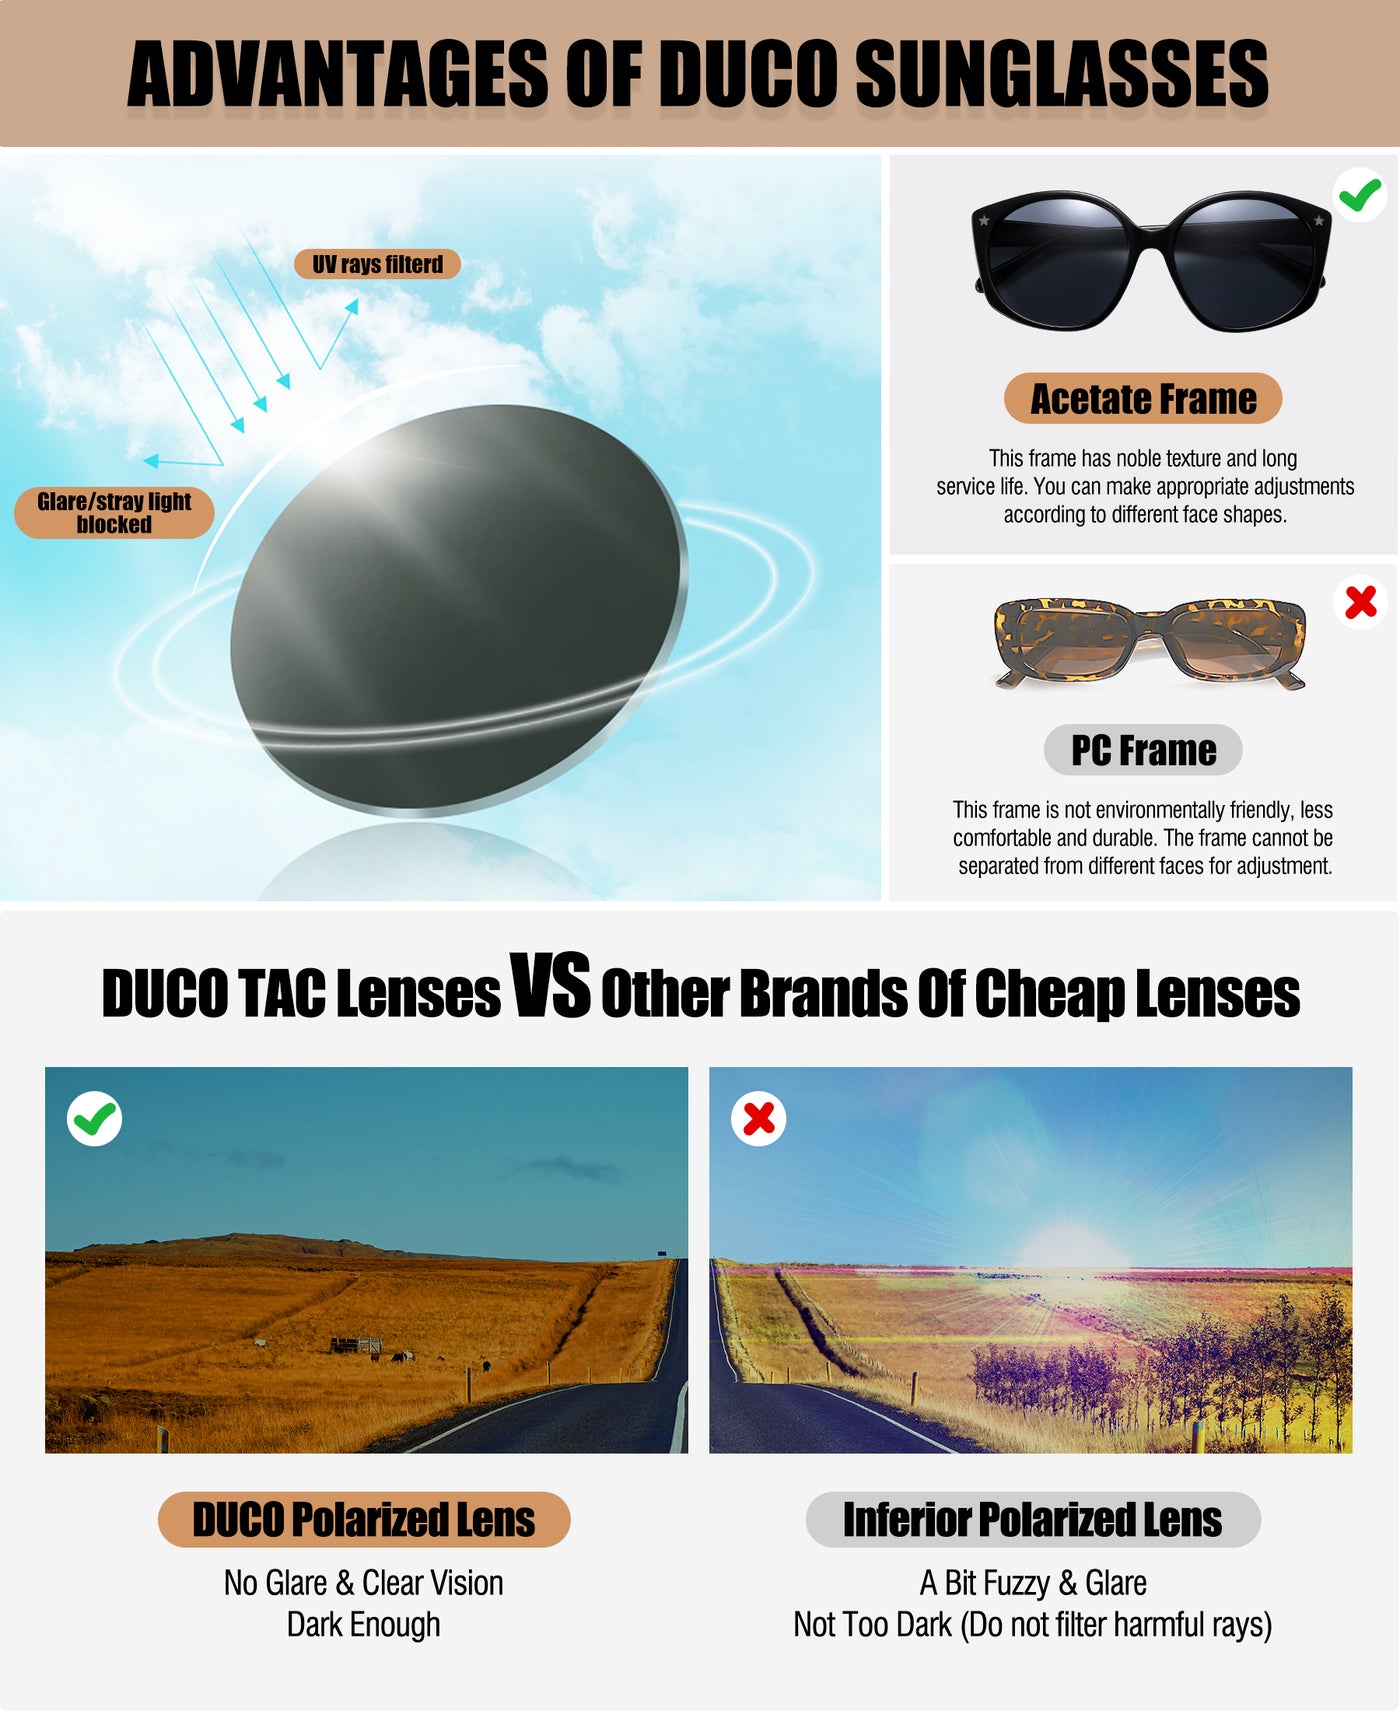 DUCO GLASSES-The right kind of shady DUCO Retro Sunglasses for Women Vintage Oversized Frame Gradient Polarized Lens DC1106 Duco 